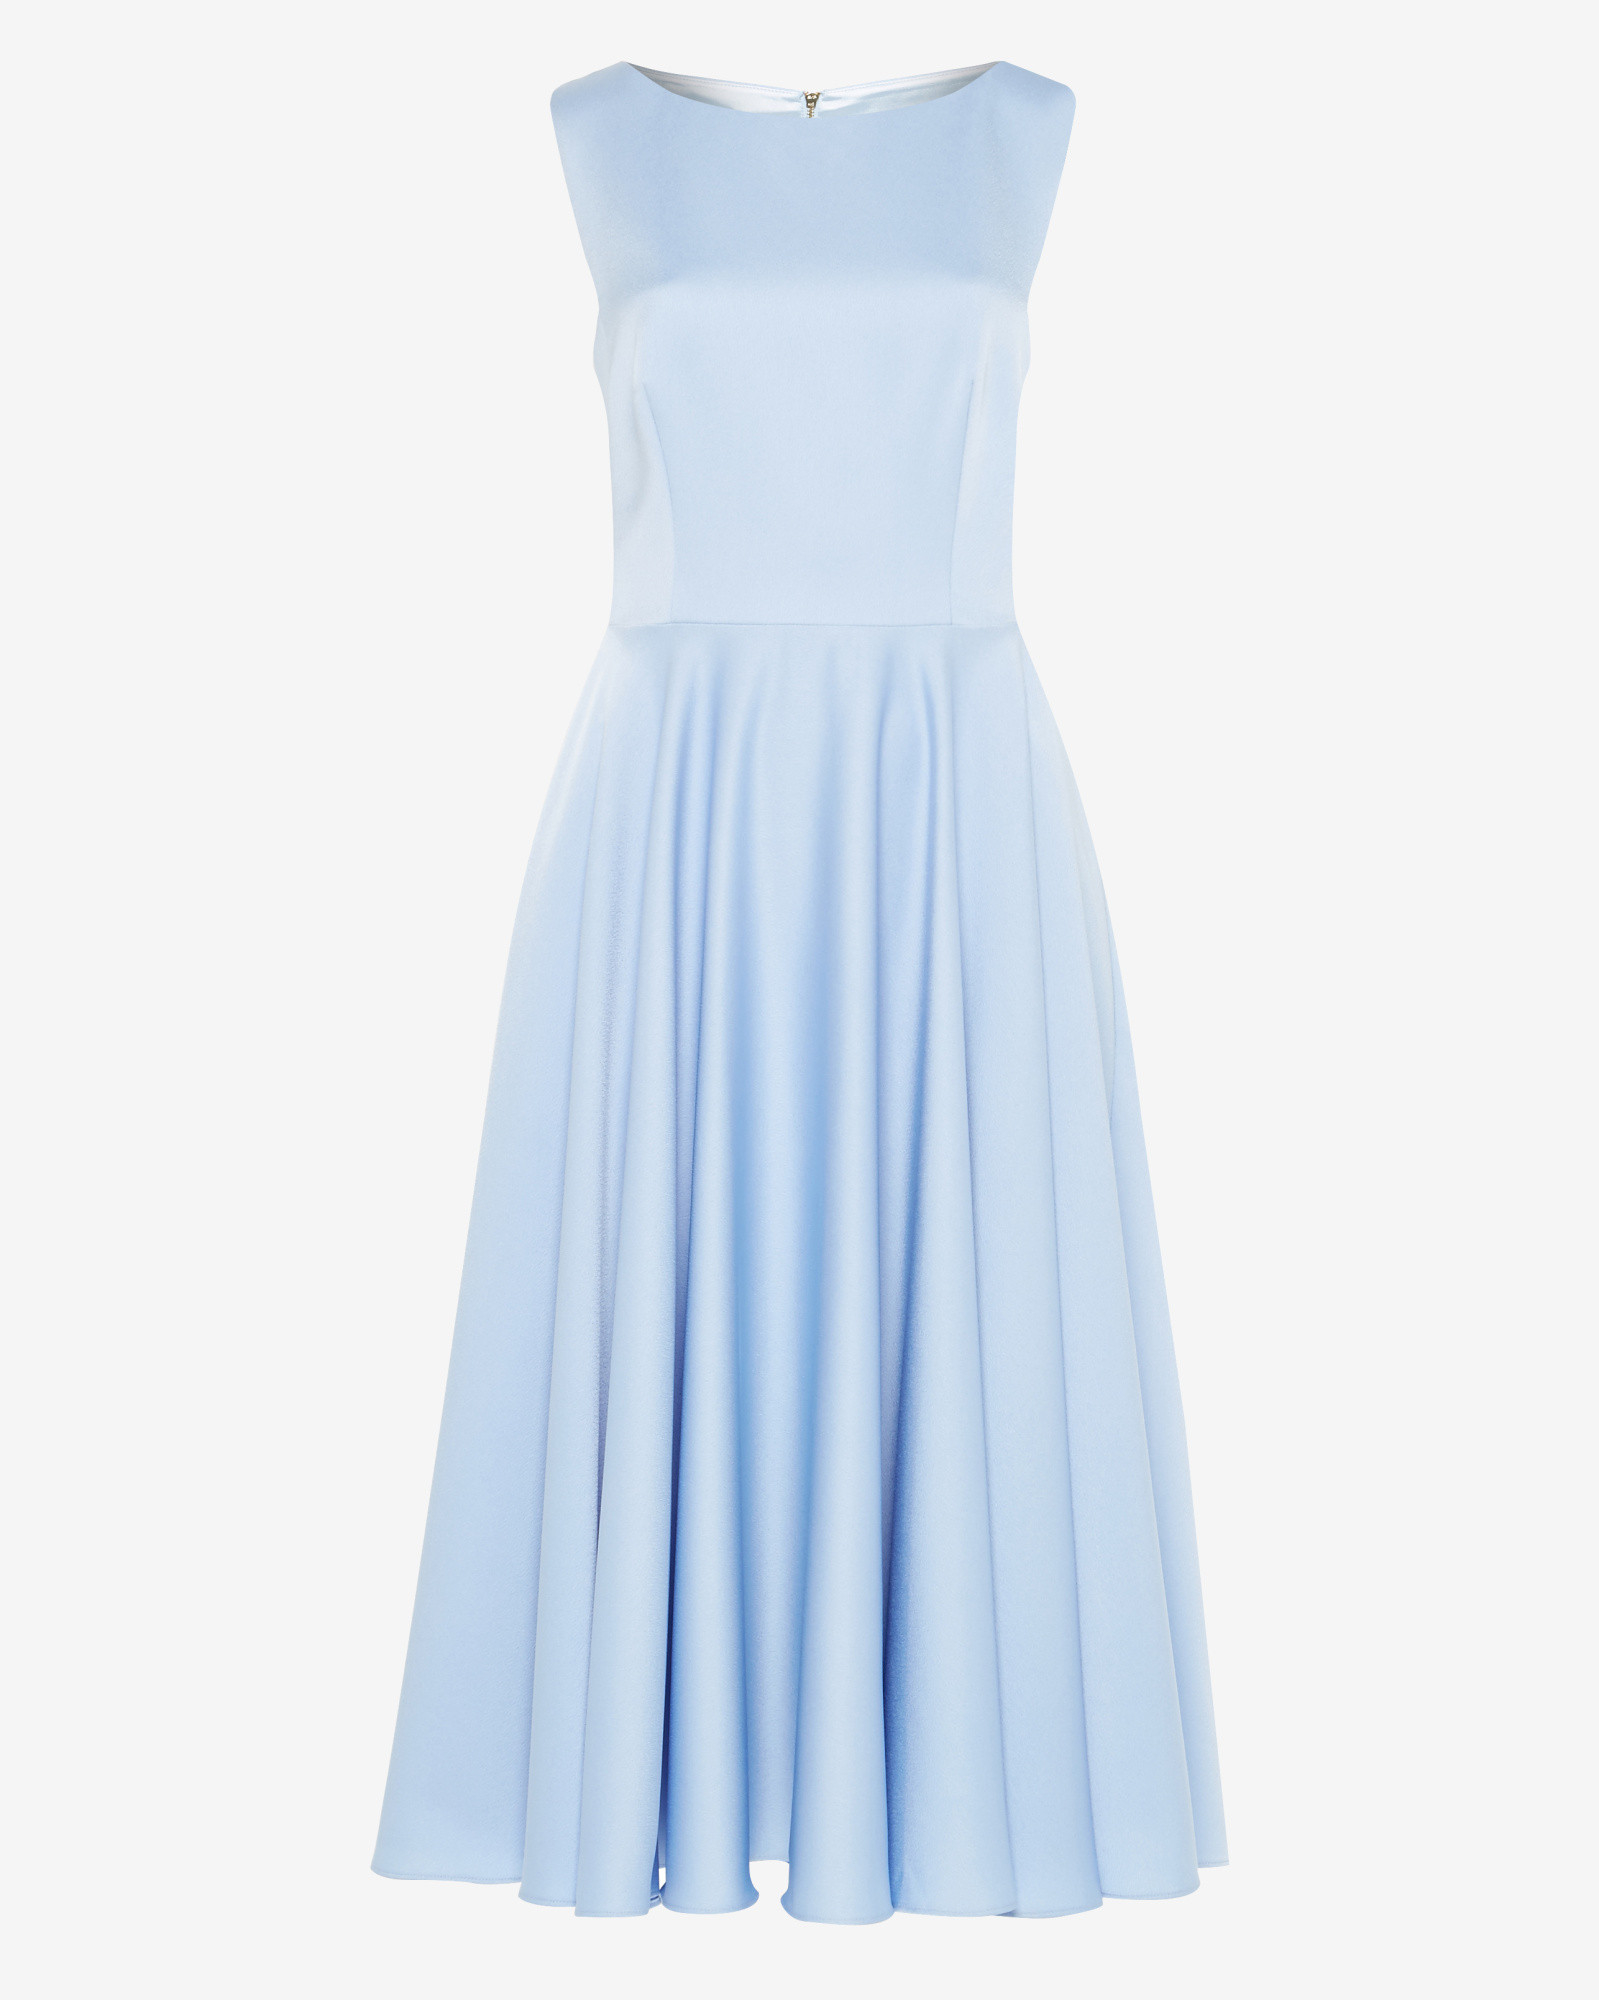 Ted Baker Synthetic Cut-out Midi Dress in Powder Blue (Blue) - Lyst